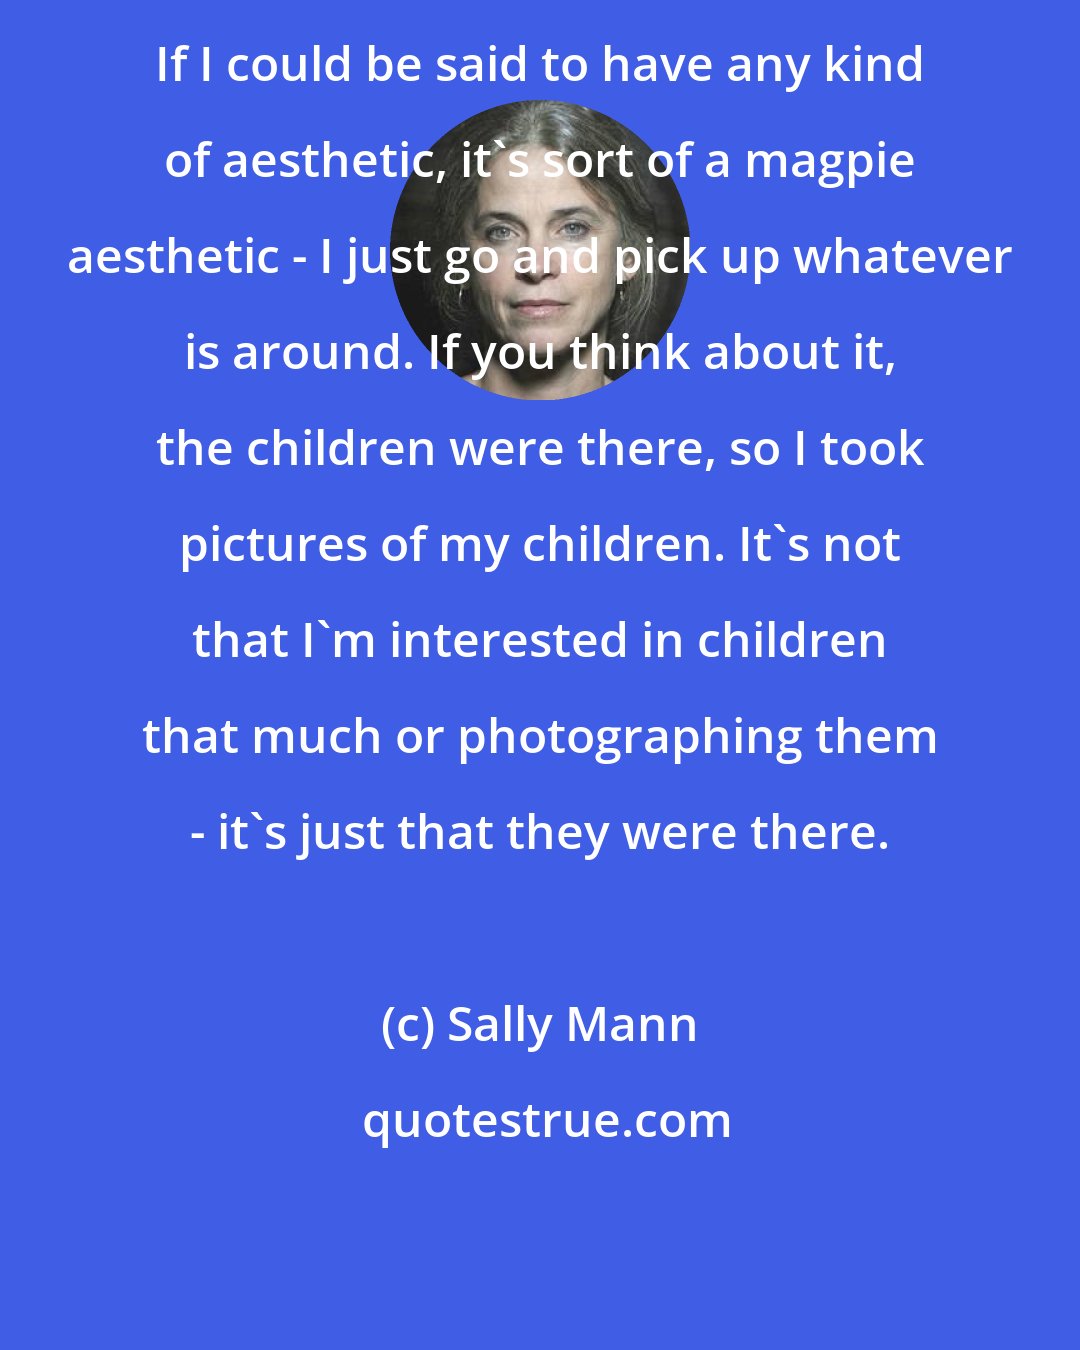 Sally Mann: If I could be said to have any kind of aesthetic, it's sort of a magpie aesthetic - I just go and pick up whatever is around. If you think about it, the children were there, so I took pictures of my children. It's not that I'm interested in children that much or photographing them - it's just that they were there.